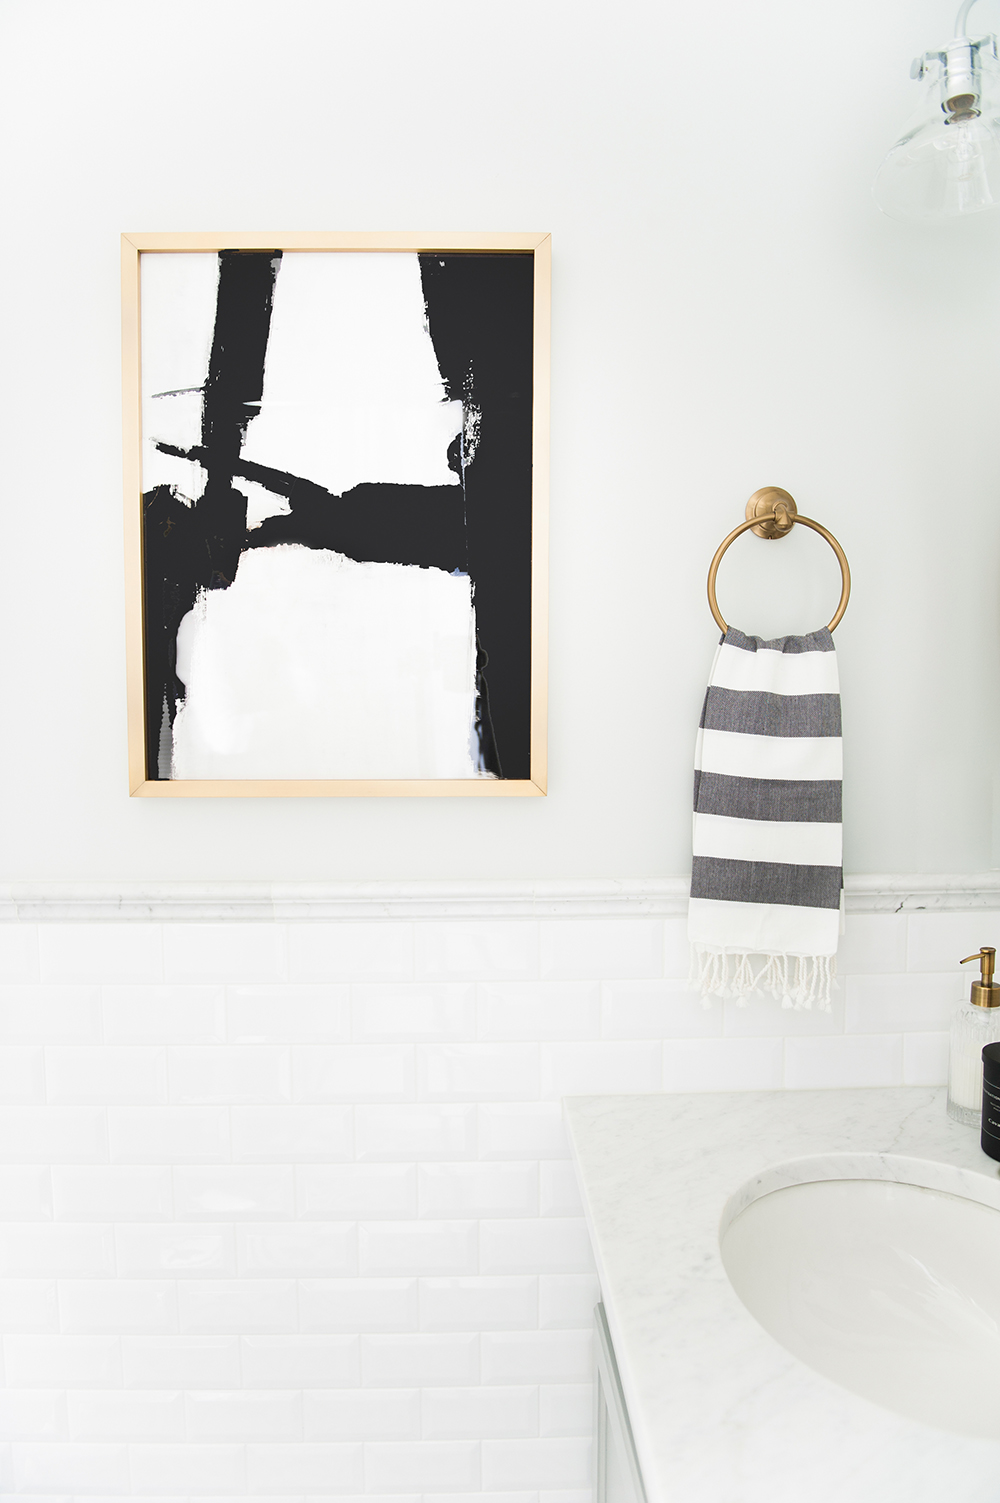 Black and gold accents add interest to this small bathroom.